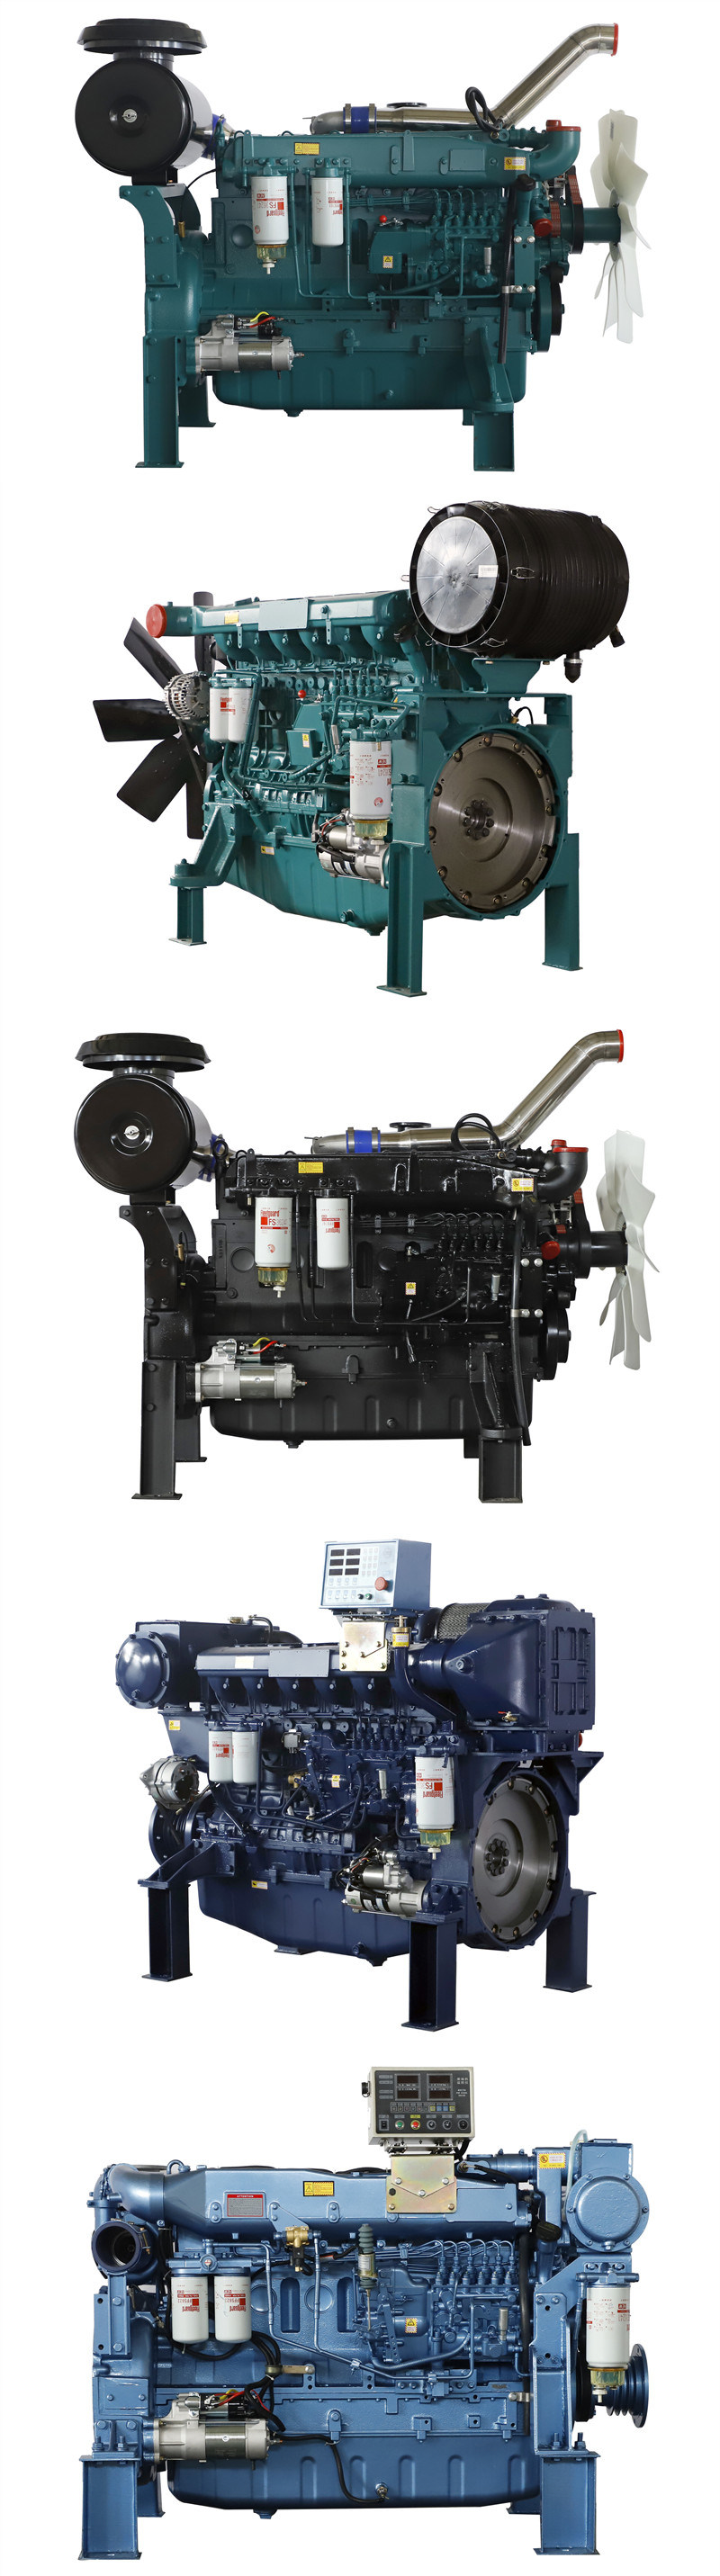 Water-Cooled 6 Cylinders Diesel Engine Manufacturer From China